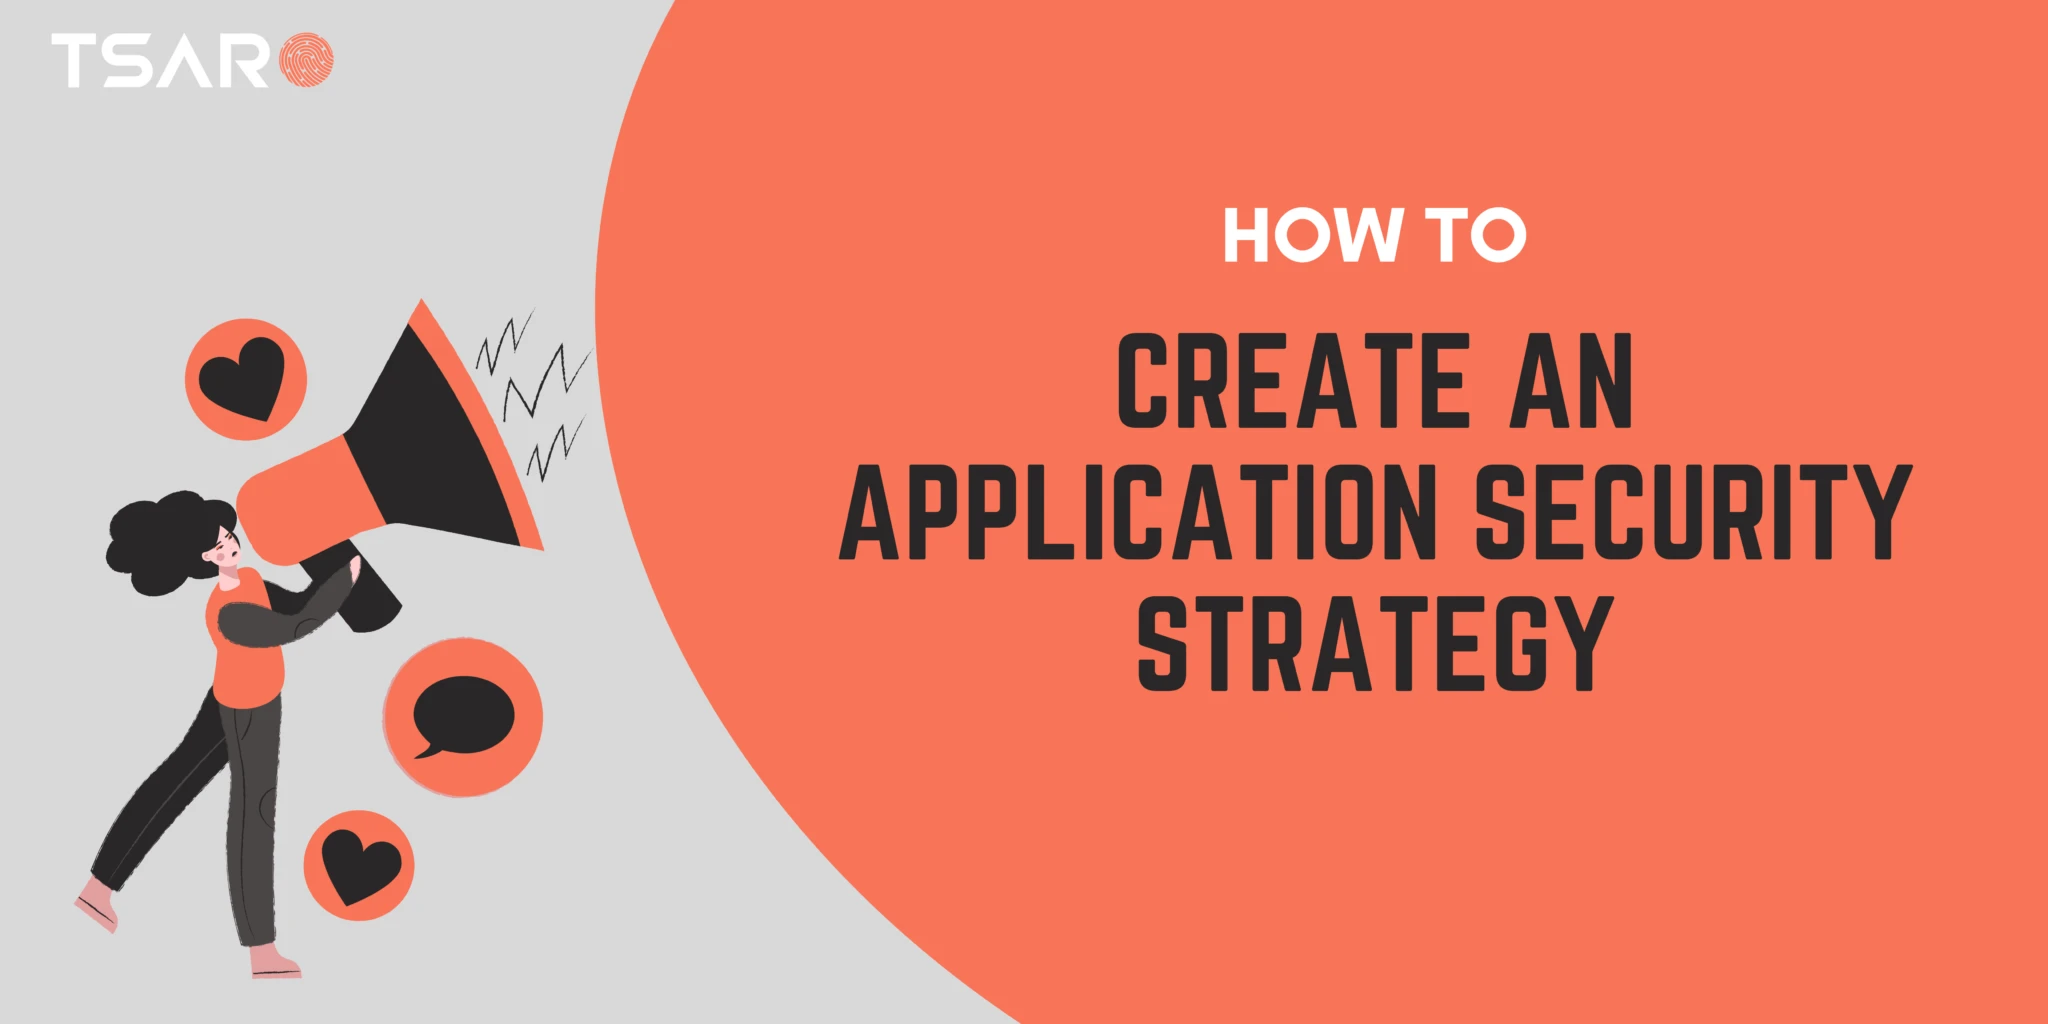 How to Create an Application Security Strategy